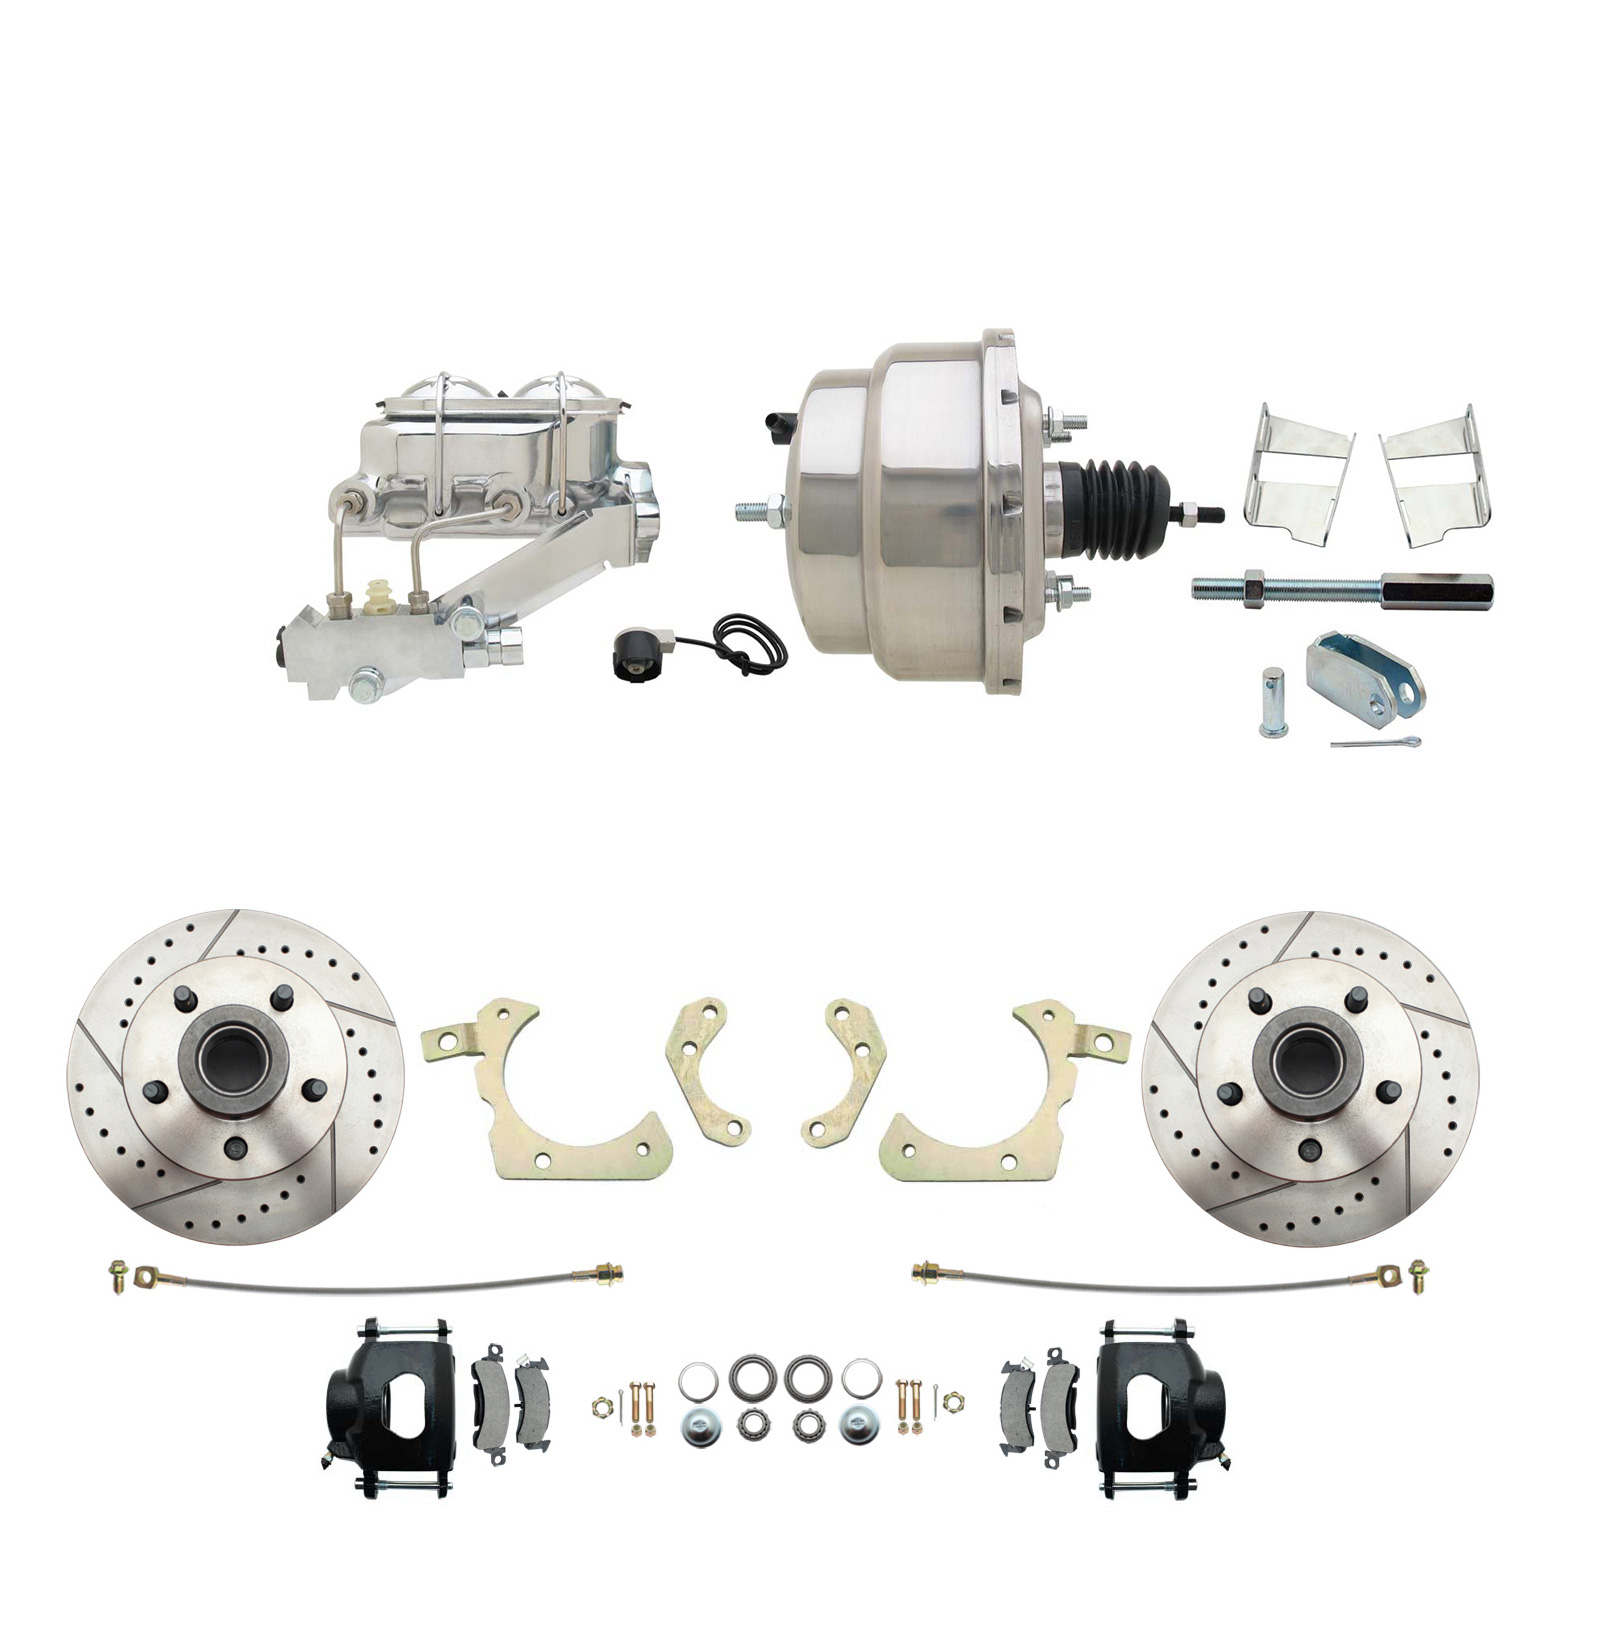 1959-1964 GM Full Size Front Disc Brake Kit Black Powder Coated Calipers Drilled/Slotted Rotors (Impala, Bel Air, Biscayne) & 8 Dual Stainless Steel Booster Conversion Kit W/ Chrome Master Cylinder Left Mount Disc/ Drum Propo